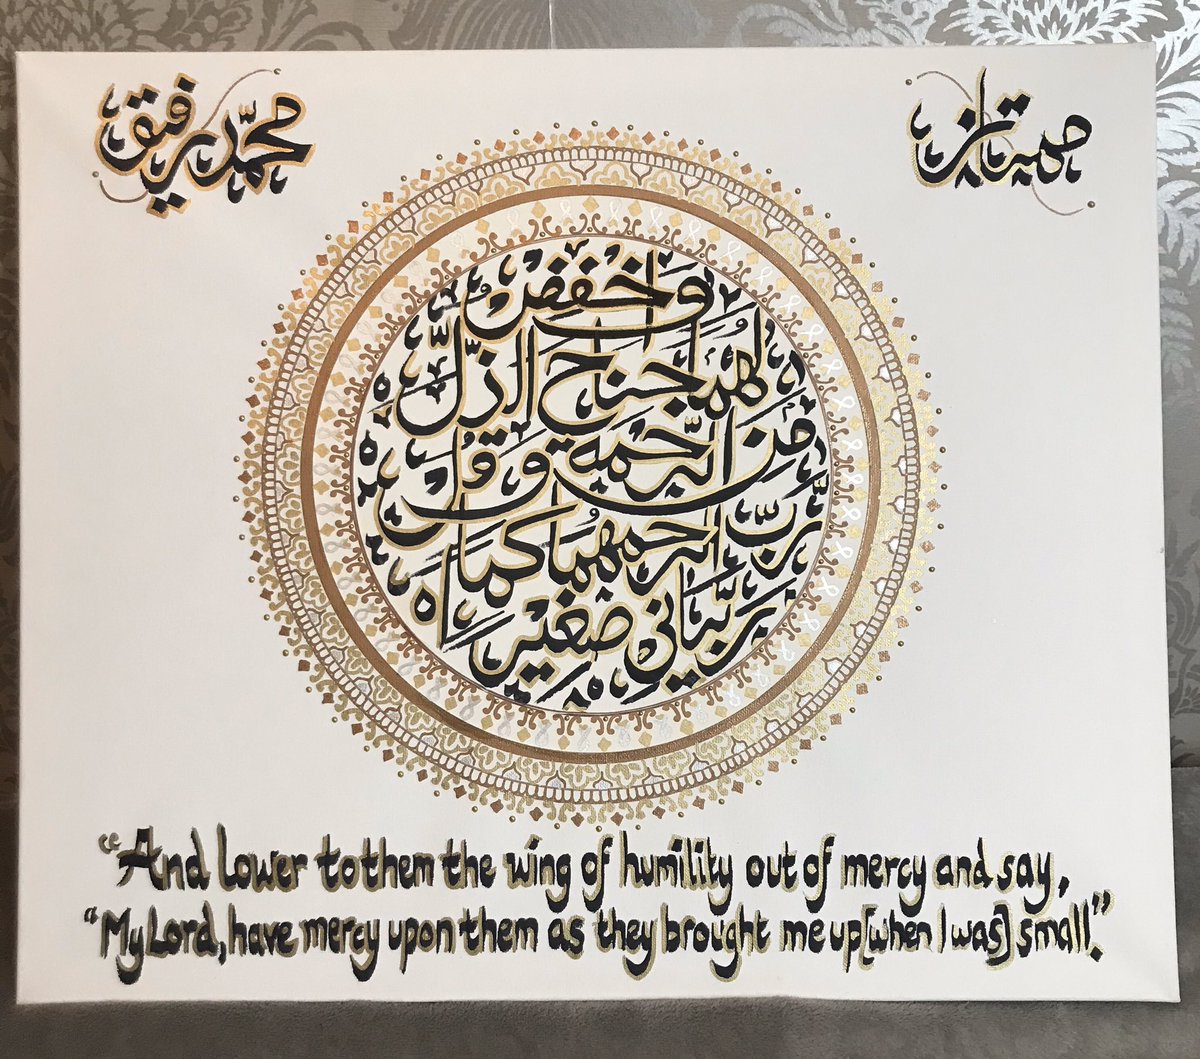 50cm x 60cm personalised canvas made on order“And lower to them the wing of humility out of mercy and say, "My Lord, have mercy upon them as they brought me up [when I was] small." (17:24)ZahrArts  Instagram: zm_canvas_artEtsy:  https://etsy.me/38qEr2H 